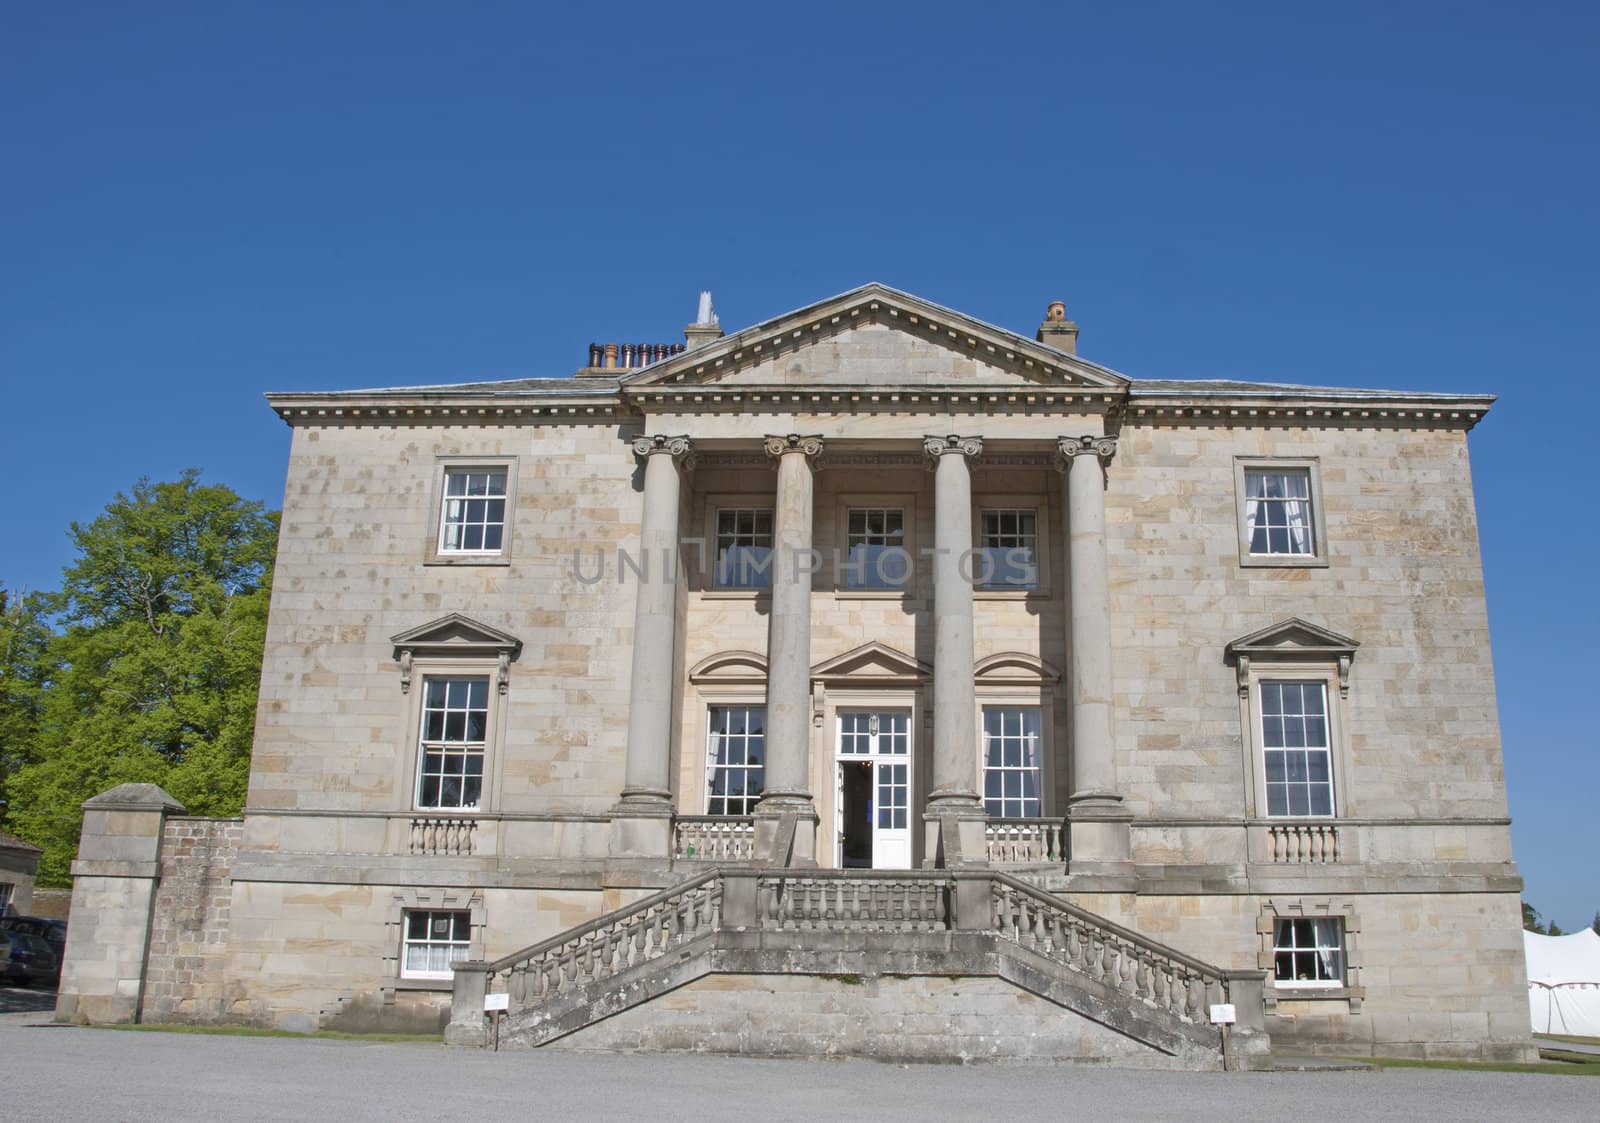 An Eighteenth CenturyStately Home built in the Palladian Style with ionic pillars under a blue sky